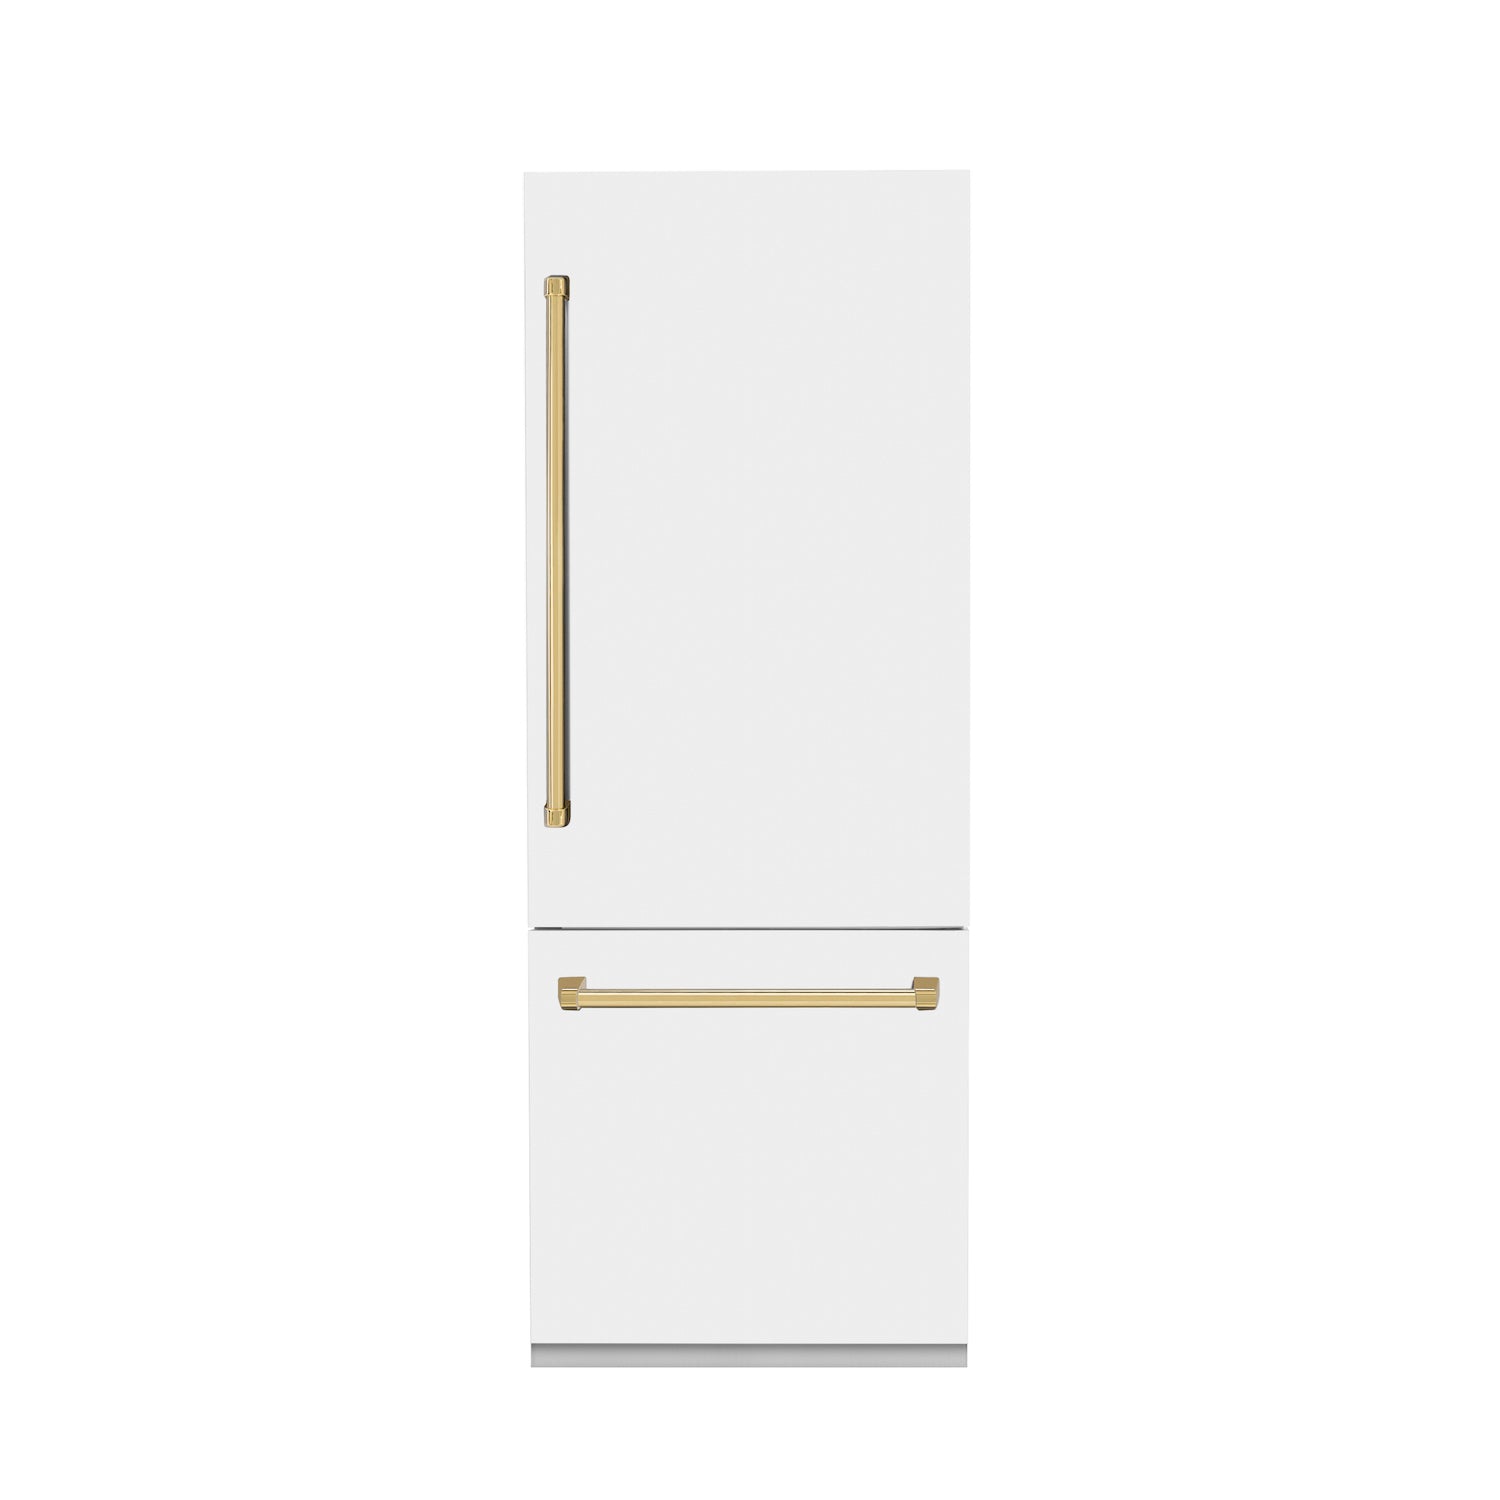 ZLINE 30" Autograph Edition 16.1 cu. ft. Built-in 2-Door Bottom Freezer Refrigerator with Internal Water and Ice Dispenser in White Matte with Gold Accents (RBIVZ-WM-30-G)